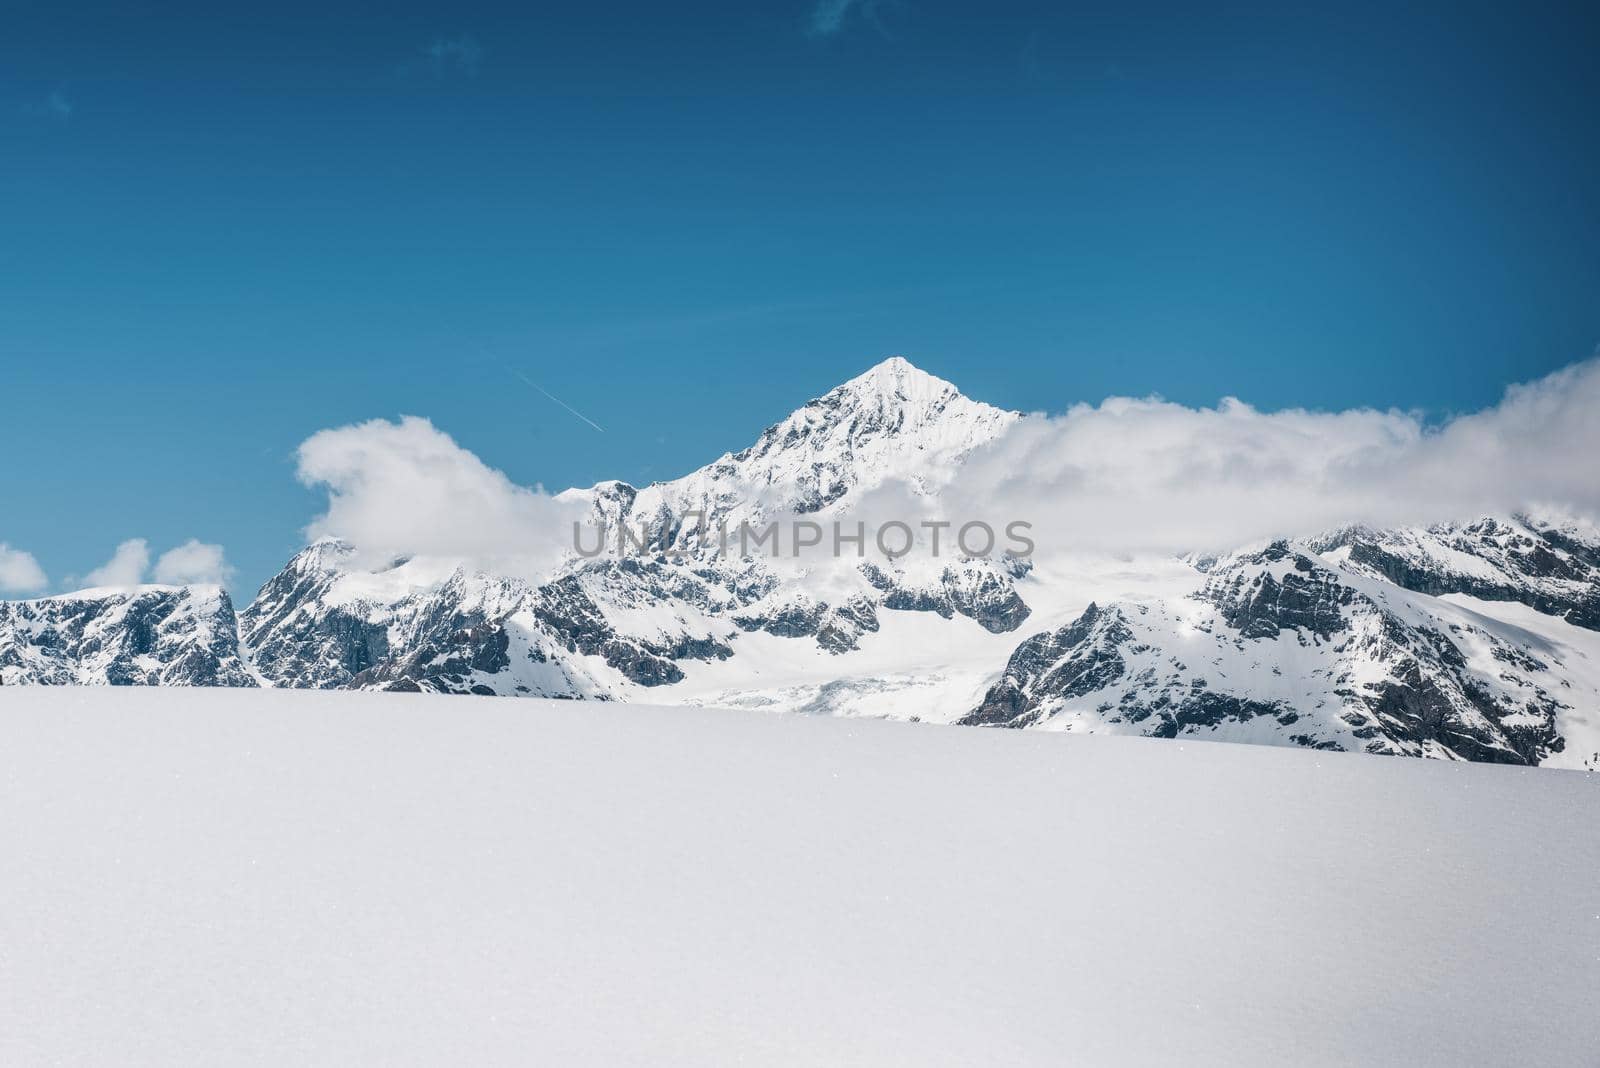 Landscape Scenery View Mountain Snowcapped of Swiss Alps, Mountains Ranges With Snow Ice at Matterhorn Glacier Paradise of Switzerland. Travel Expedition and Destination of Alpine Switzerland by MahaHeang245789